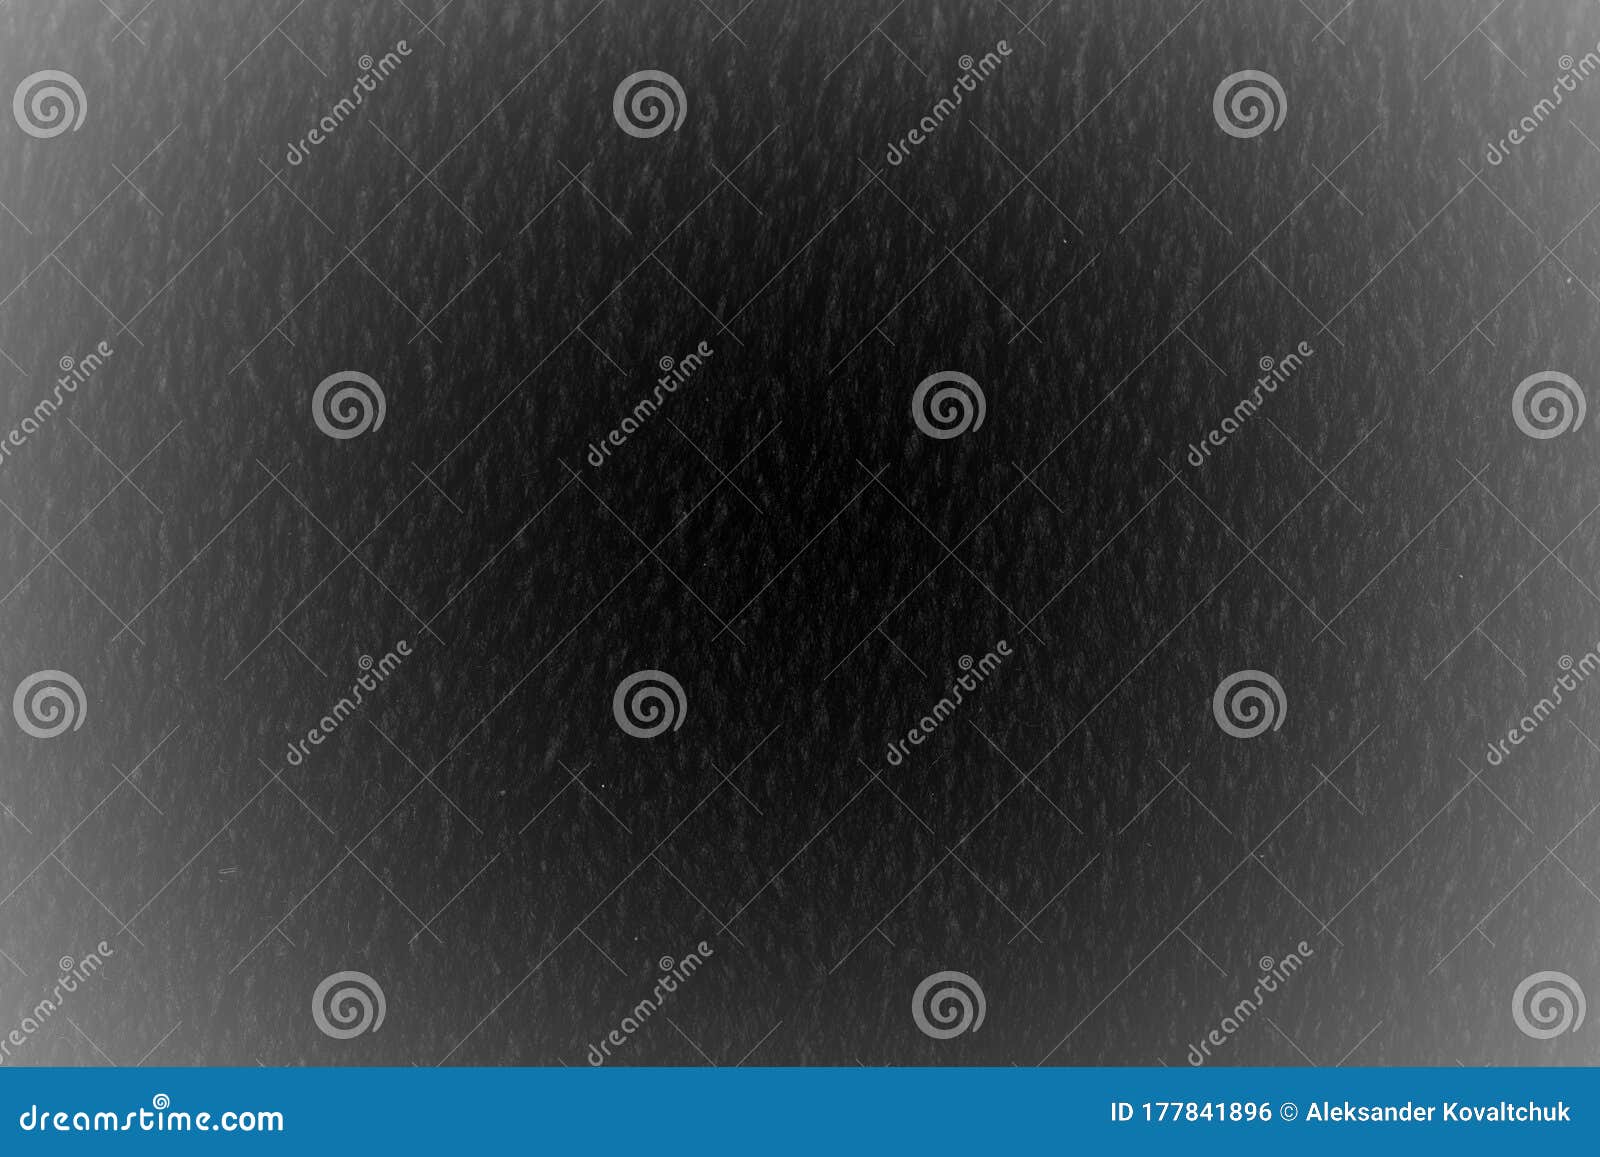 Black Jersey Fabric Texture Background Stock Photo - Image of garment ...